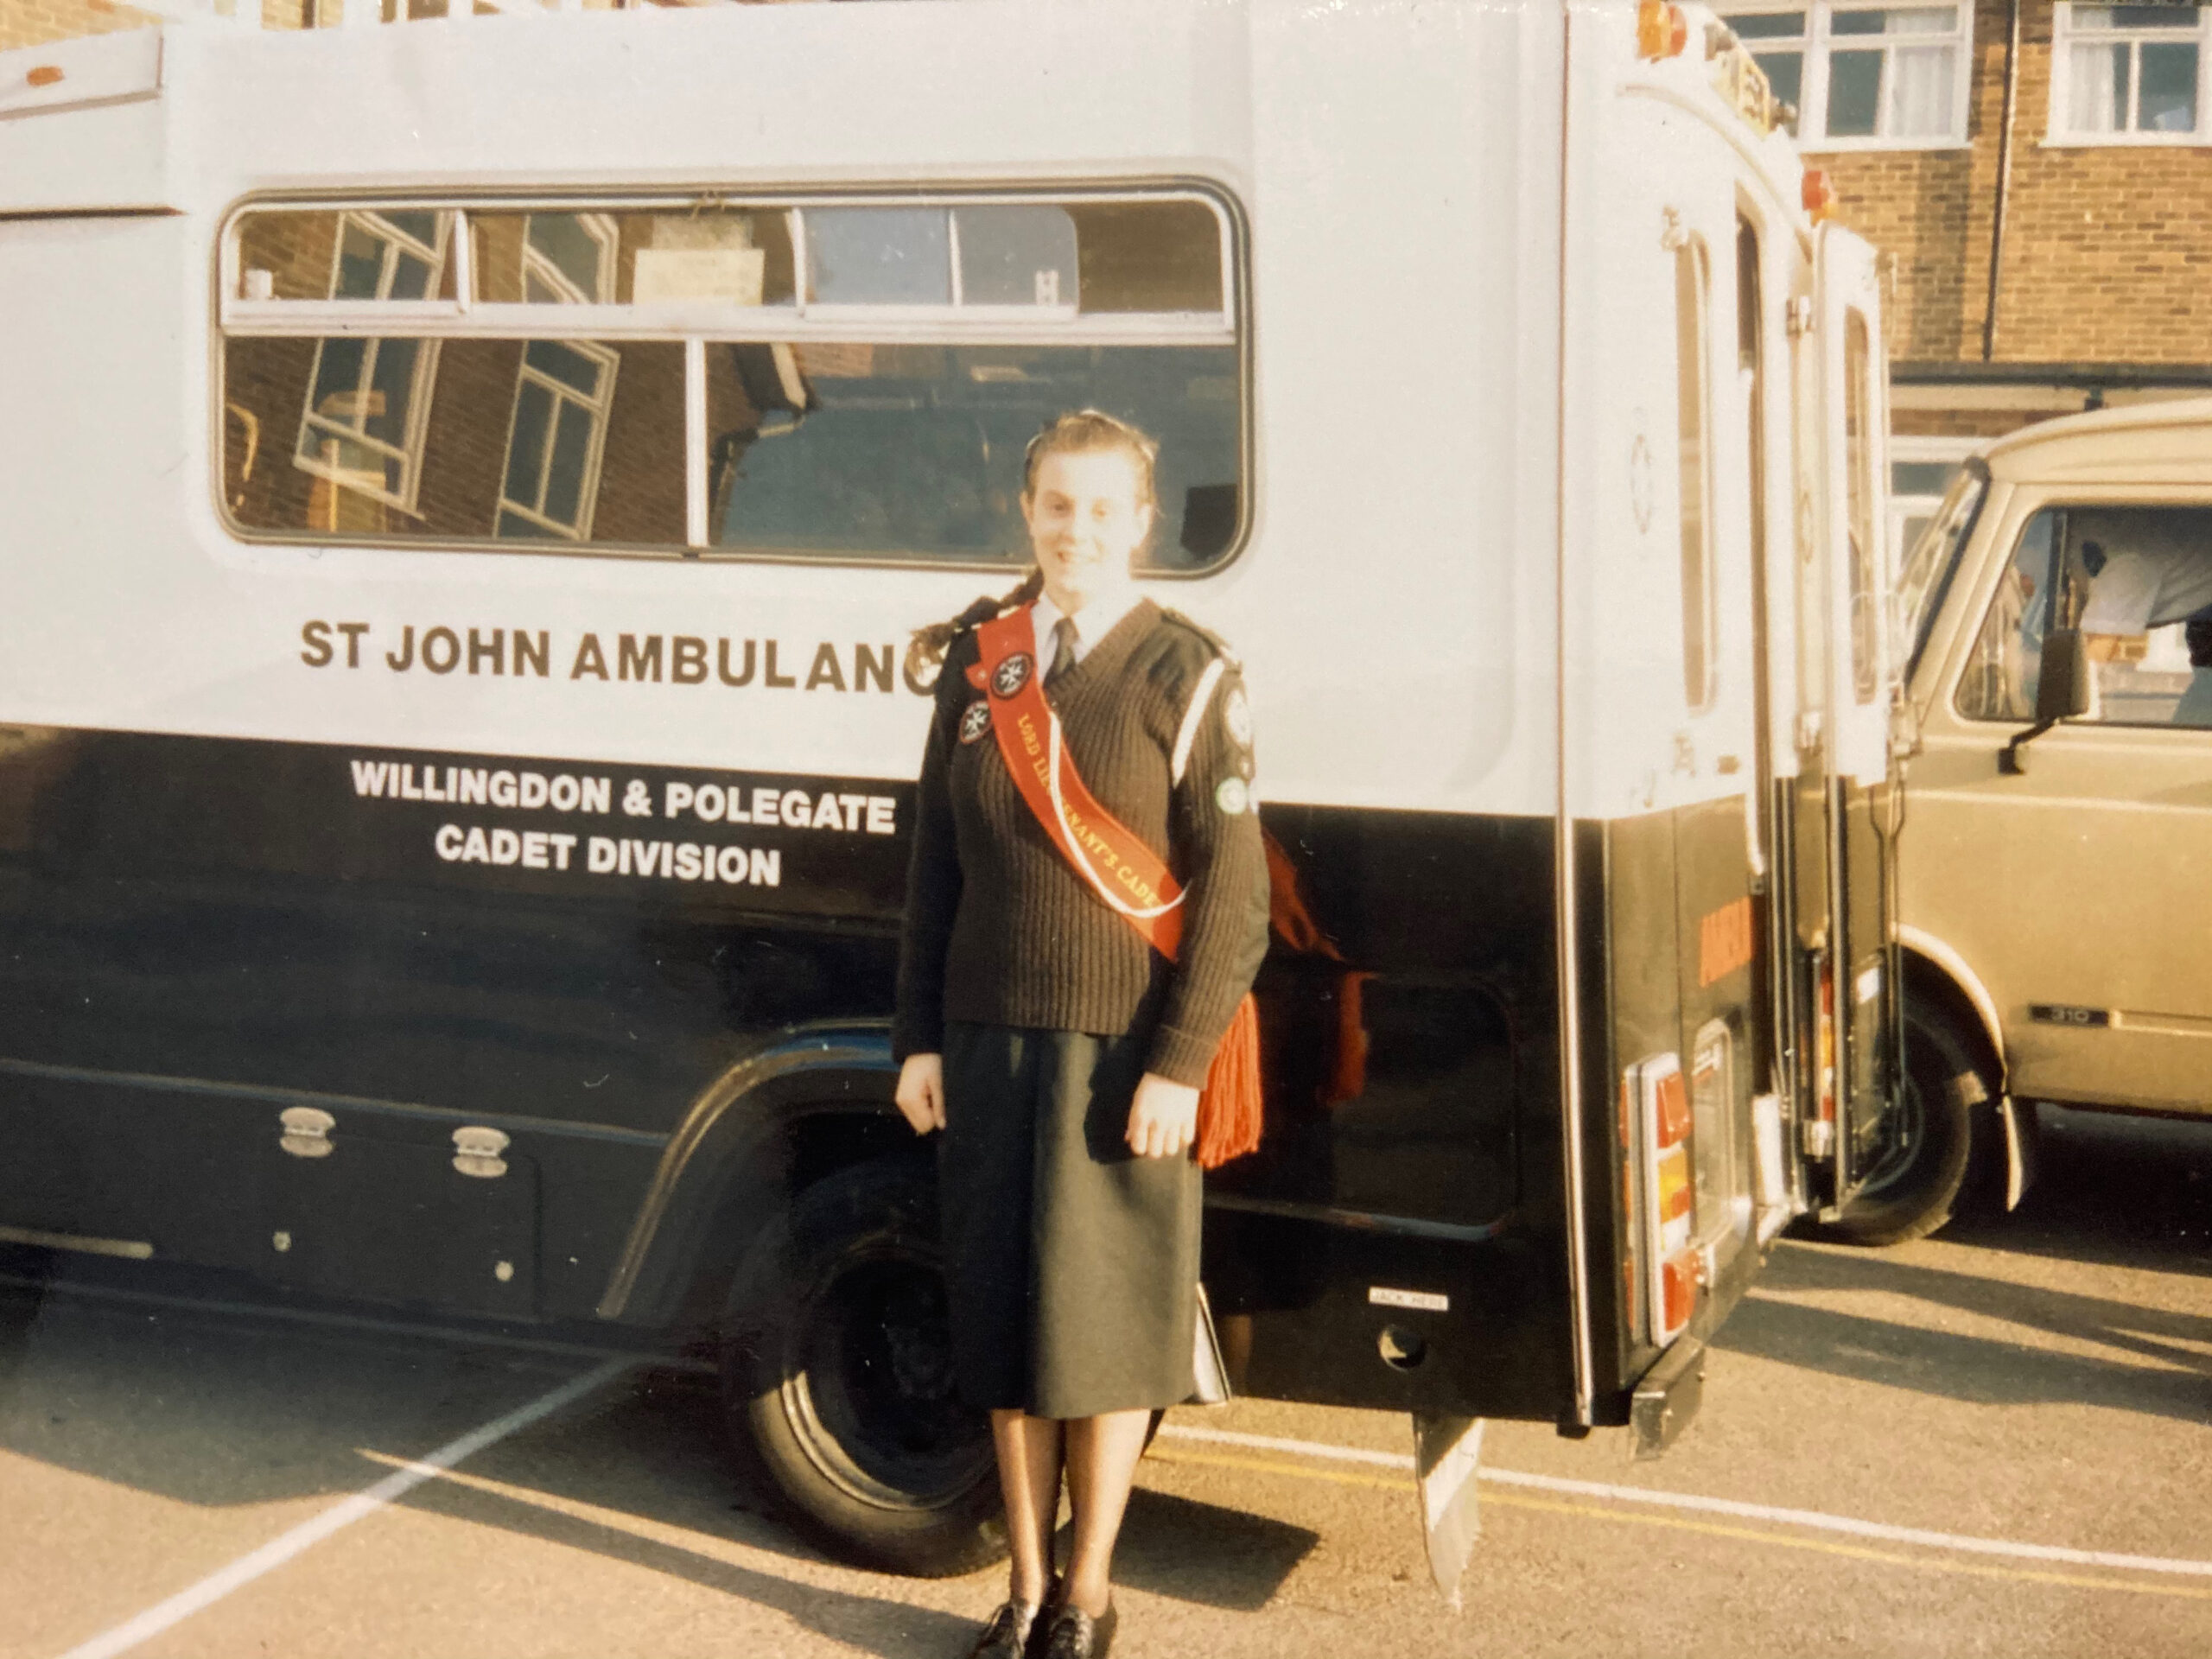 Colour photograph showing a female Cadet standing in front of an ambulance emblazoned with ‘St John Ambulance Willingdon and Polegate Cadet Division’. The Cadet is wearing a white shirt with a black tie